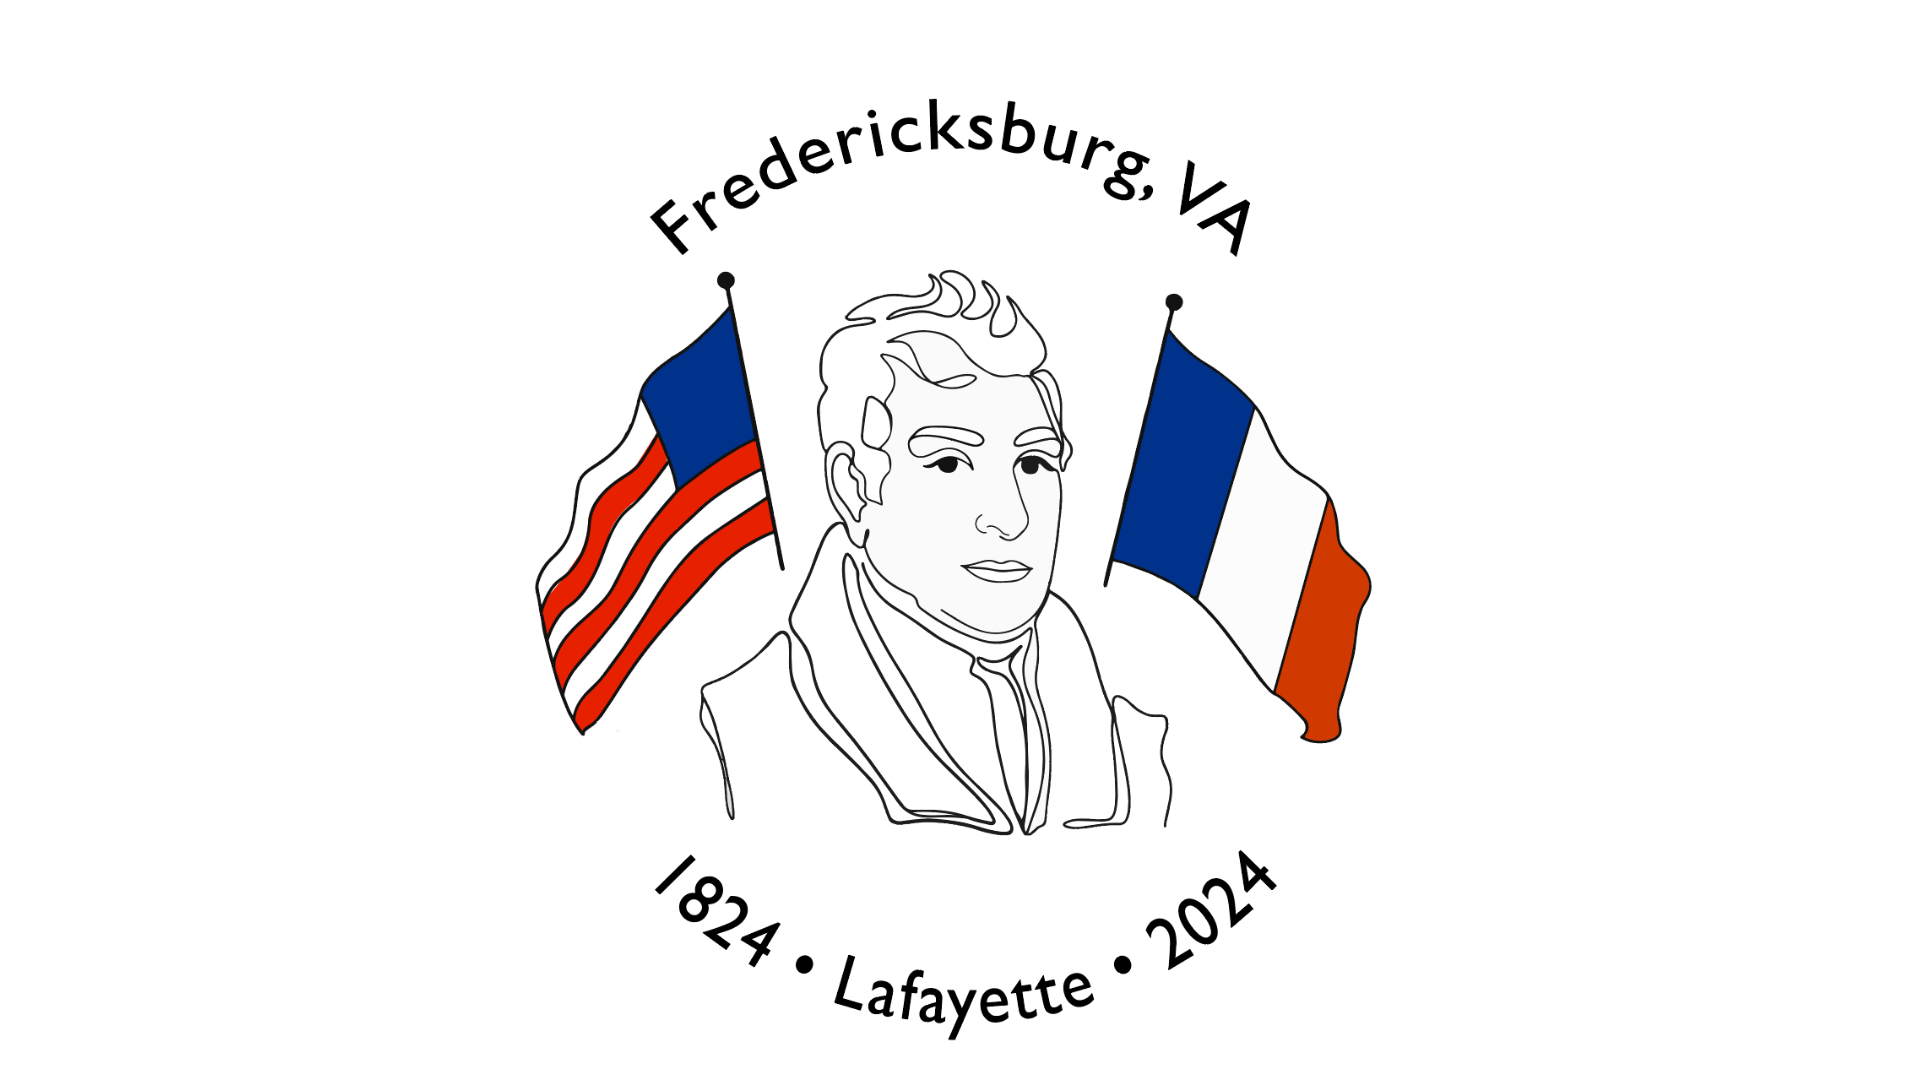 Text: Fredericksburg, VA 1824 Lafayette 2024 Black and White drawing of Marquis de Lafayette with the US flag to his left and the French flag to his right